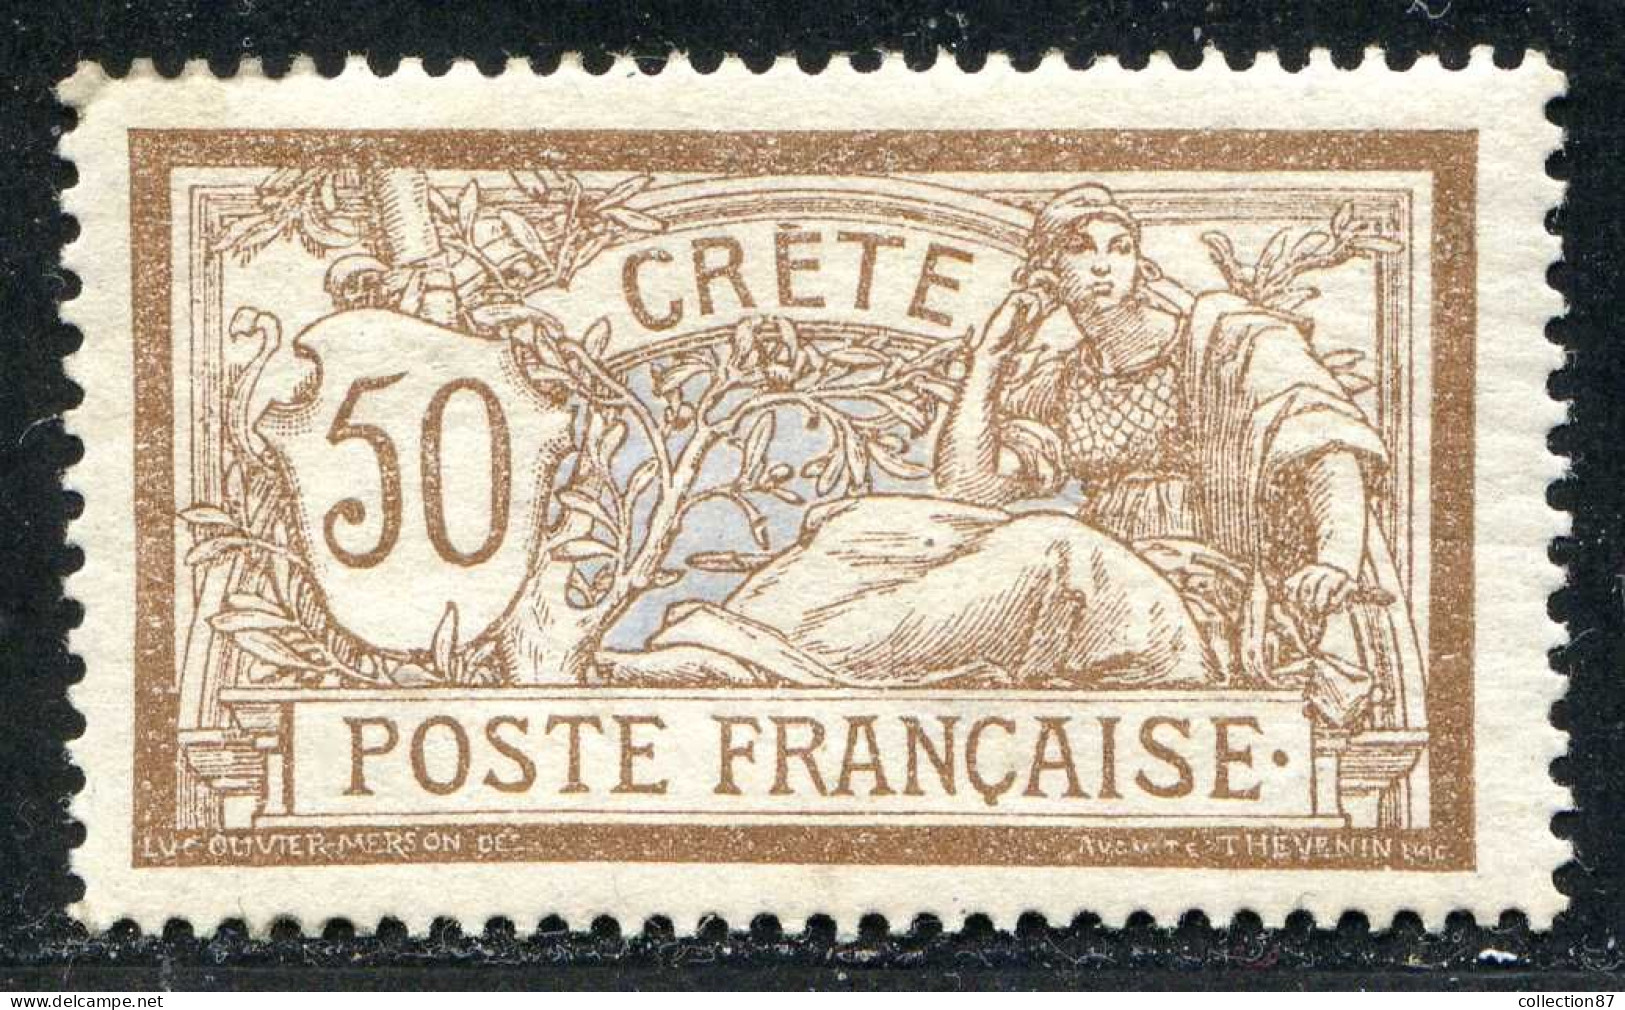 REF 091 > CRETE < Yv N° 12 * Centrage Correct < Neuf Ch. Dos Visible - MH * Cote 20 € - Neufs